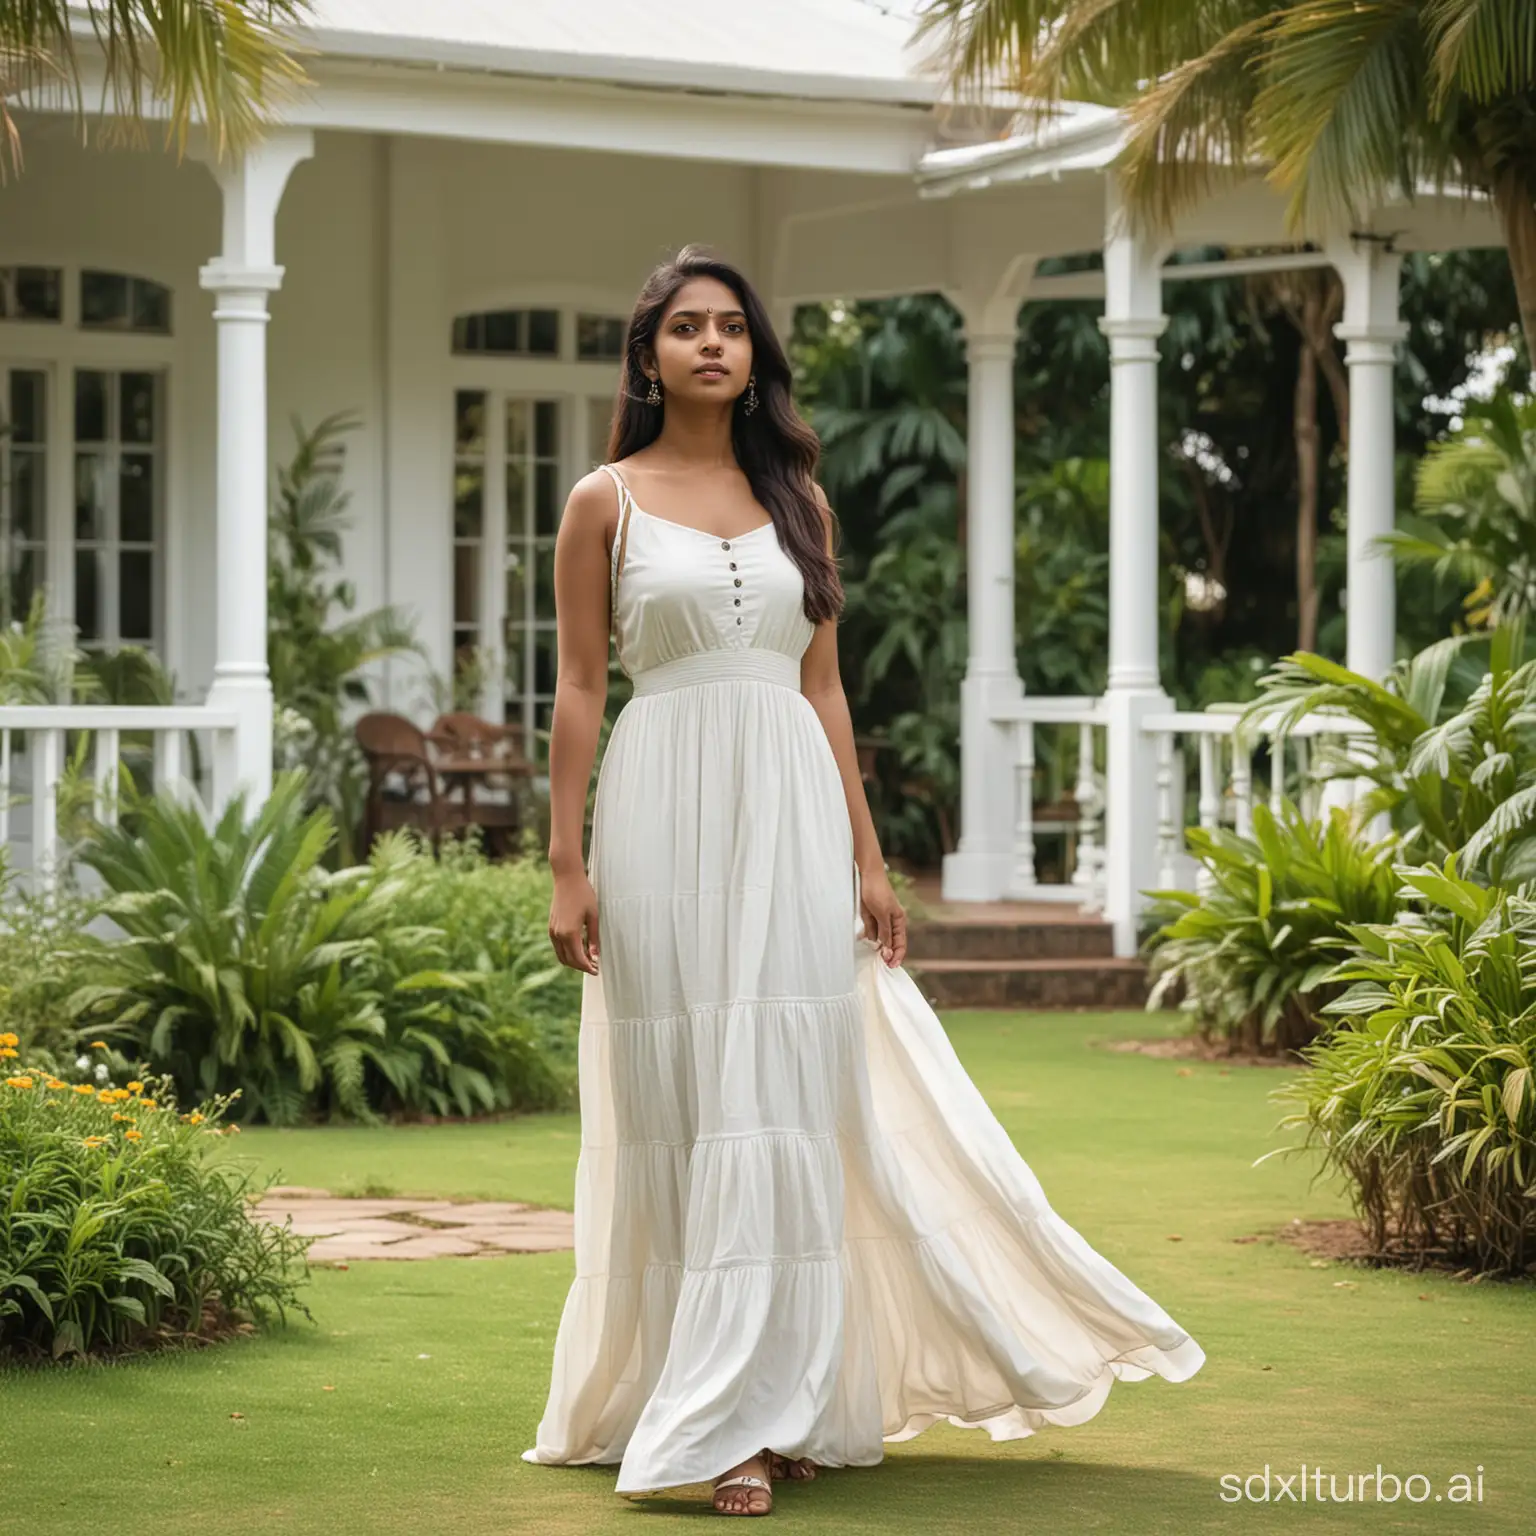 Modern-Indian-Woman-in-White-Dress-Standing-Before-Grand-Mansion-Garden